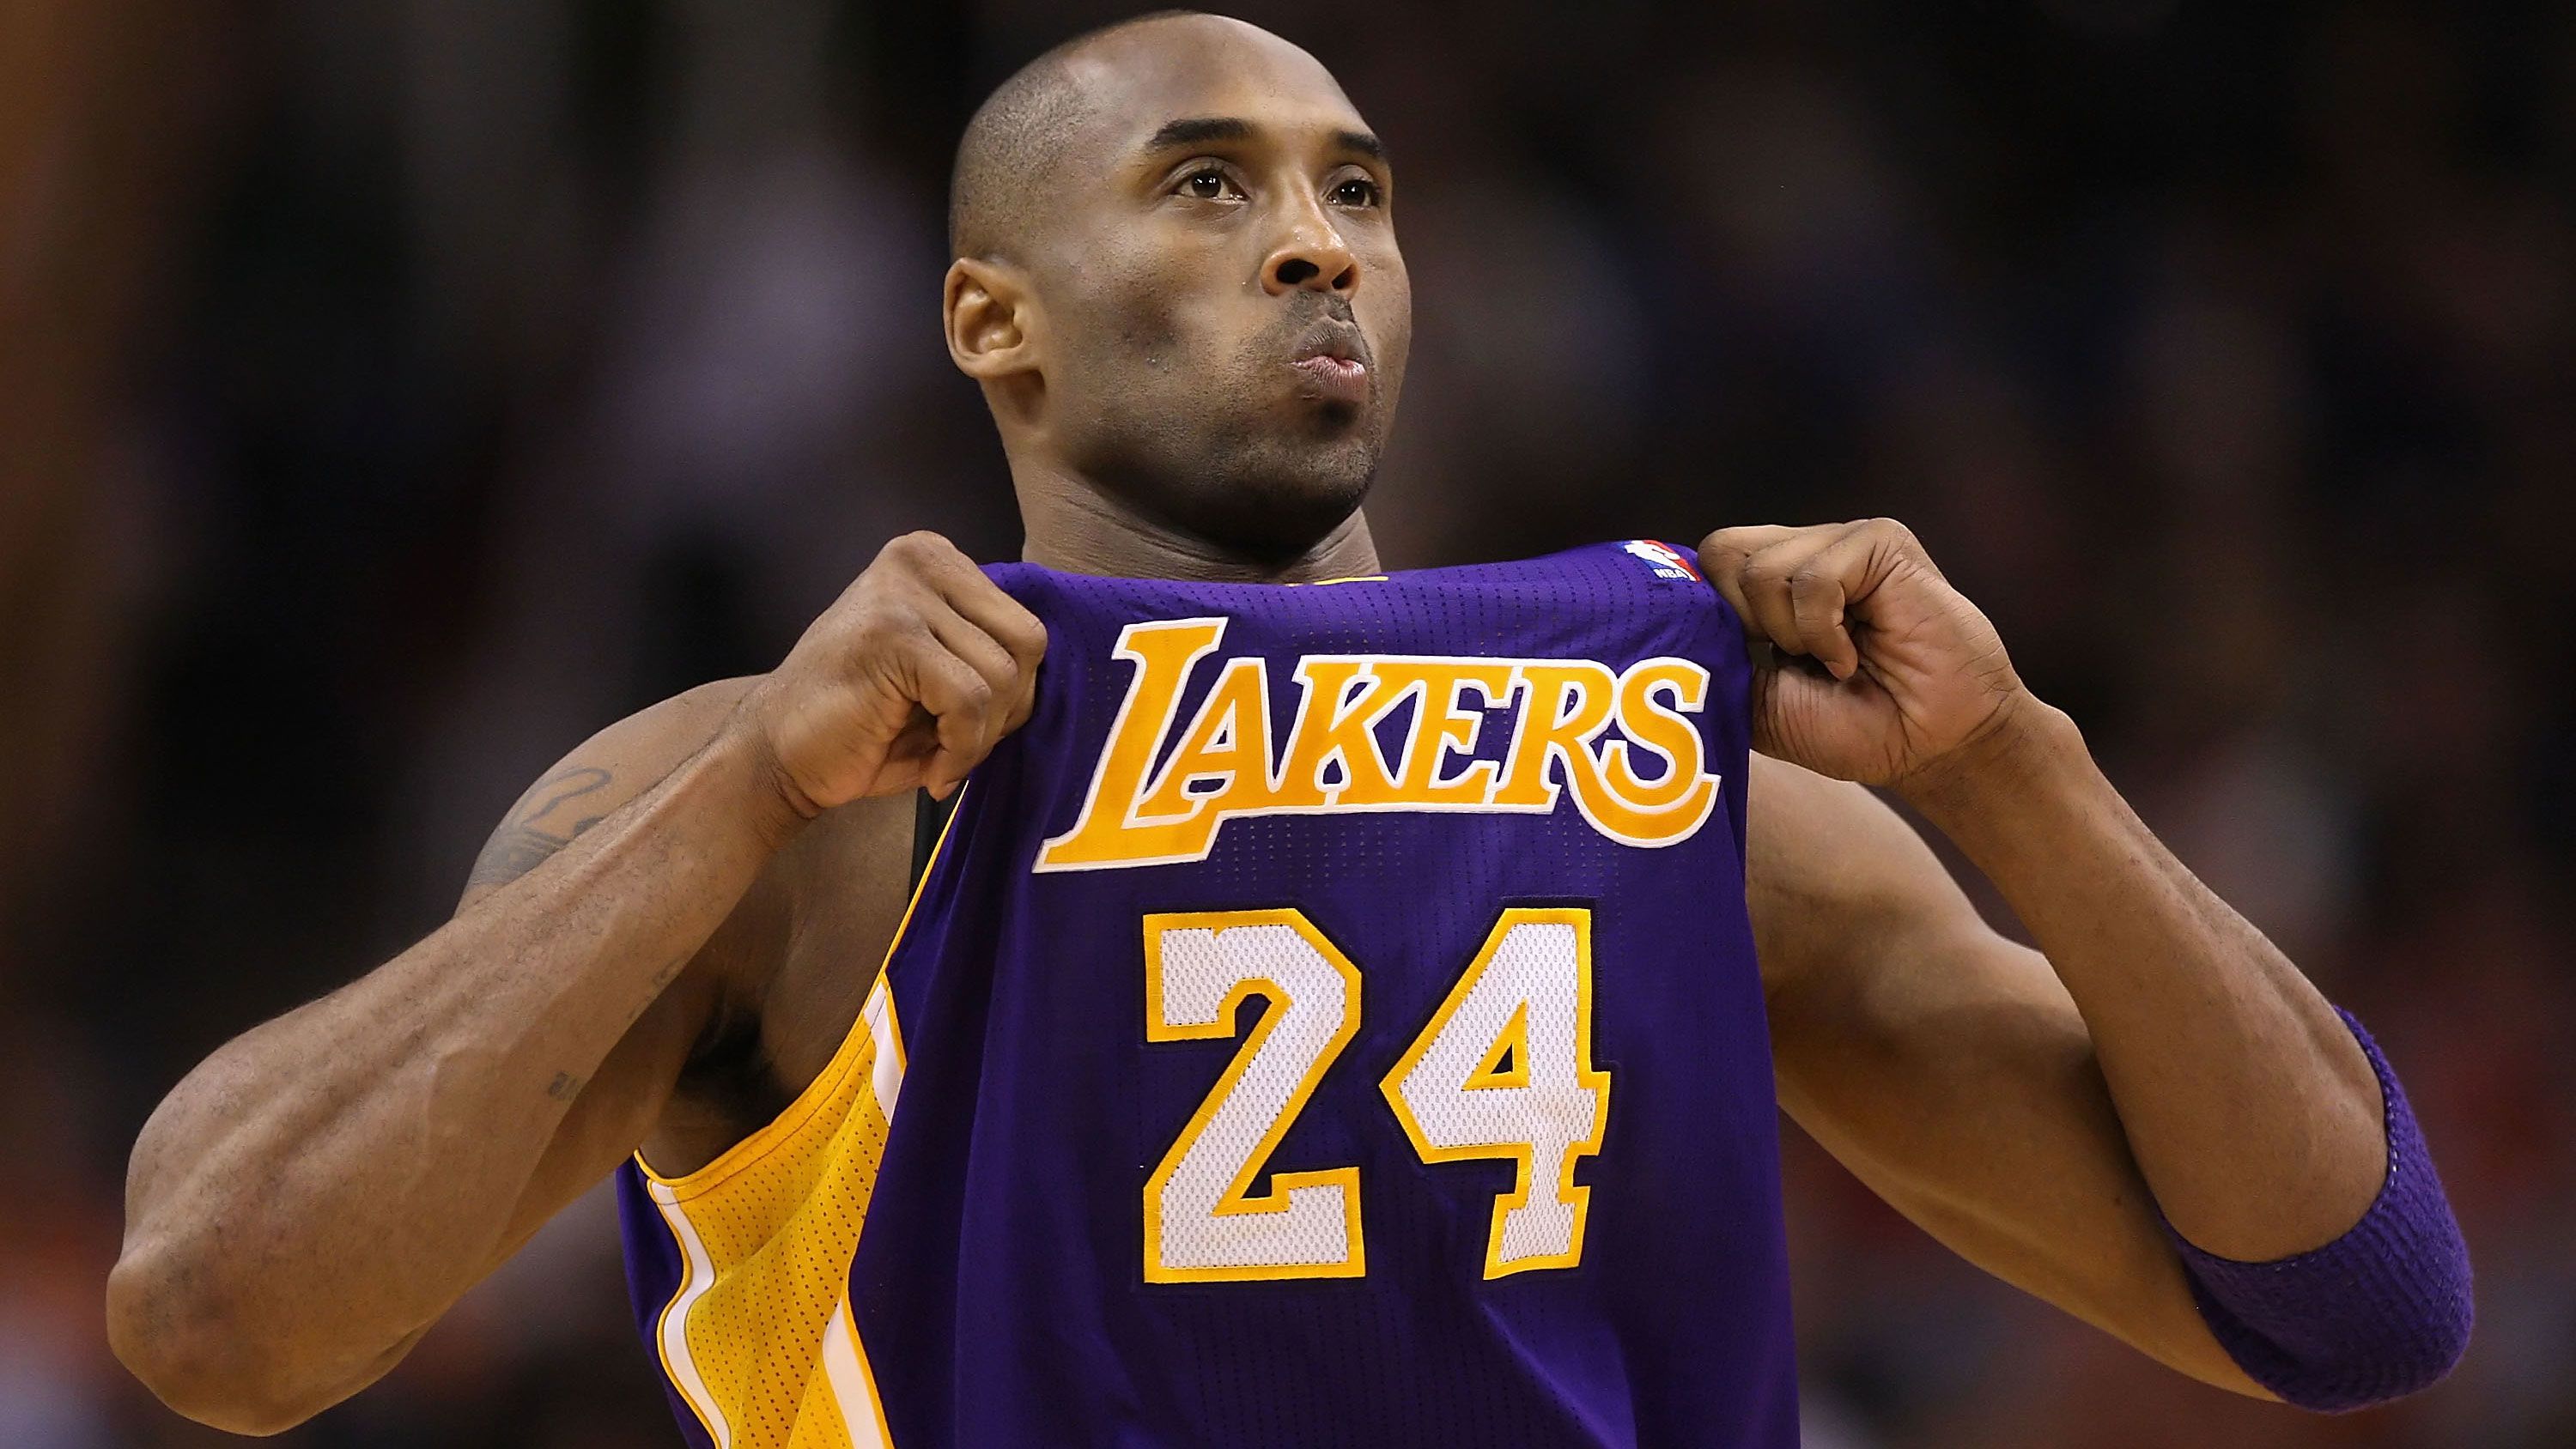 A Tribute To Kobe Bryant From A Kings Fan